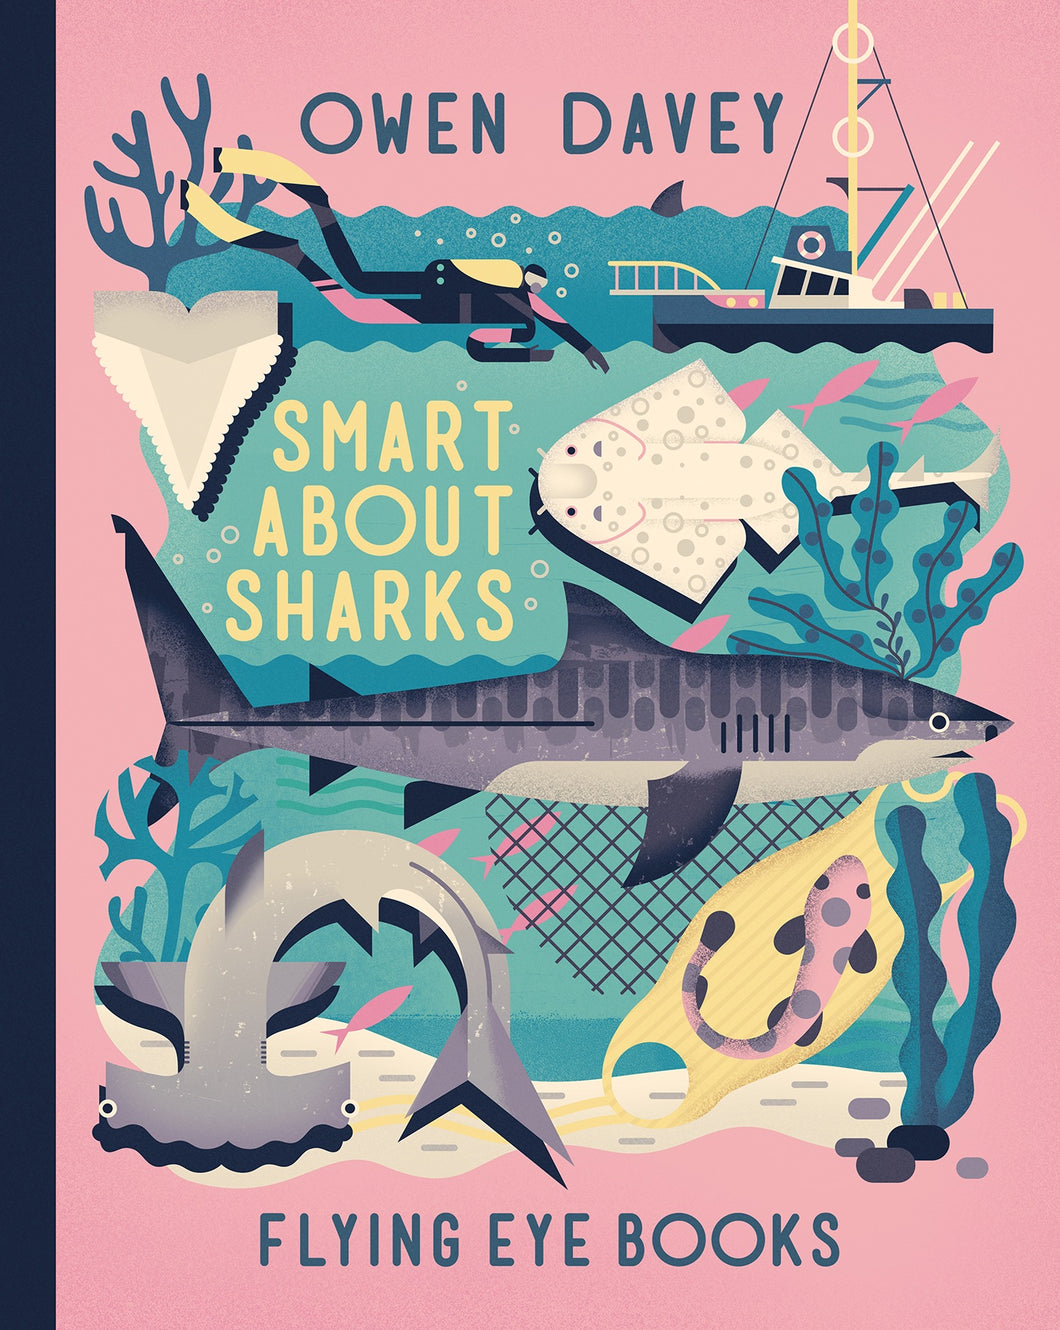 Smart About Sharks! - Things They Love